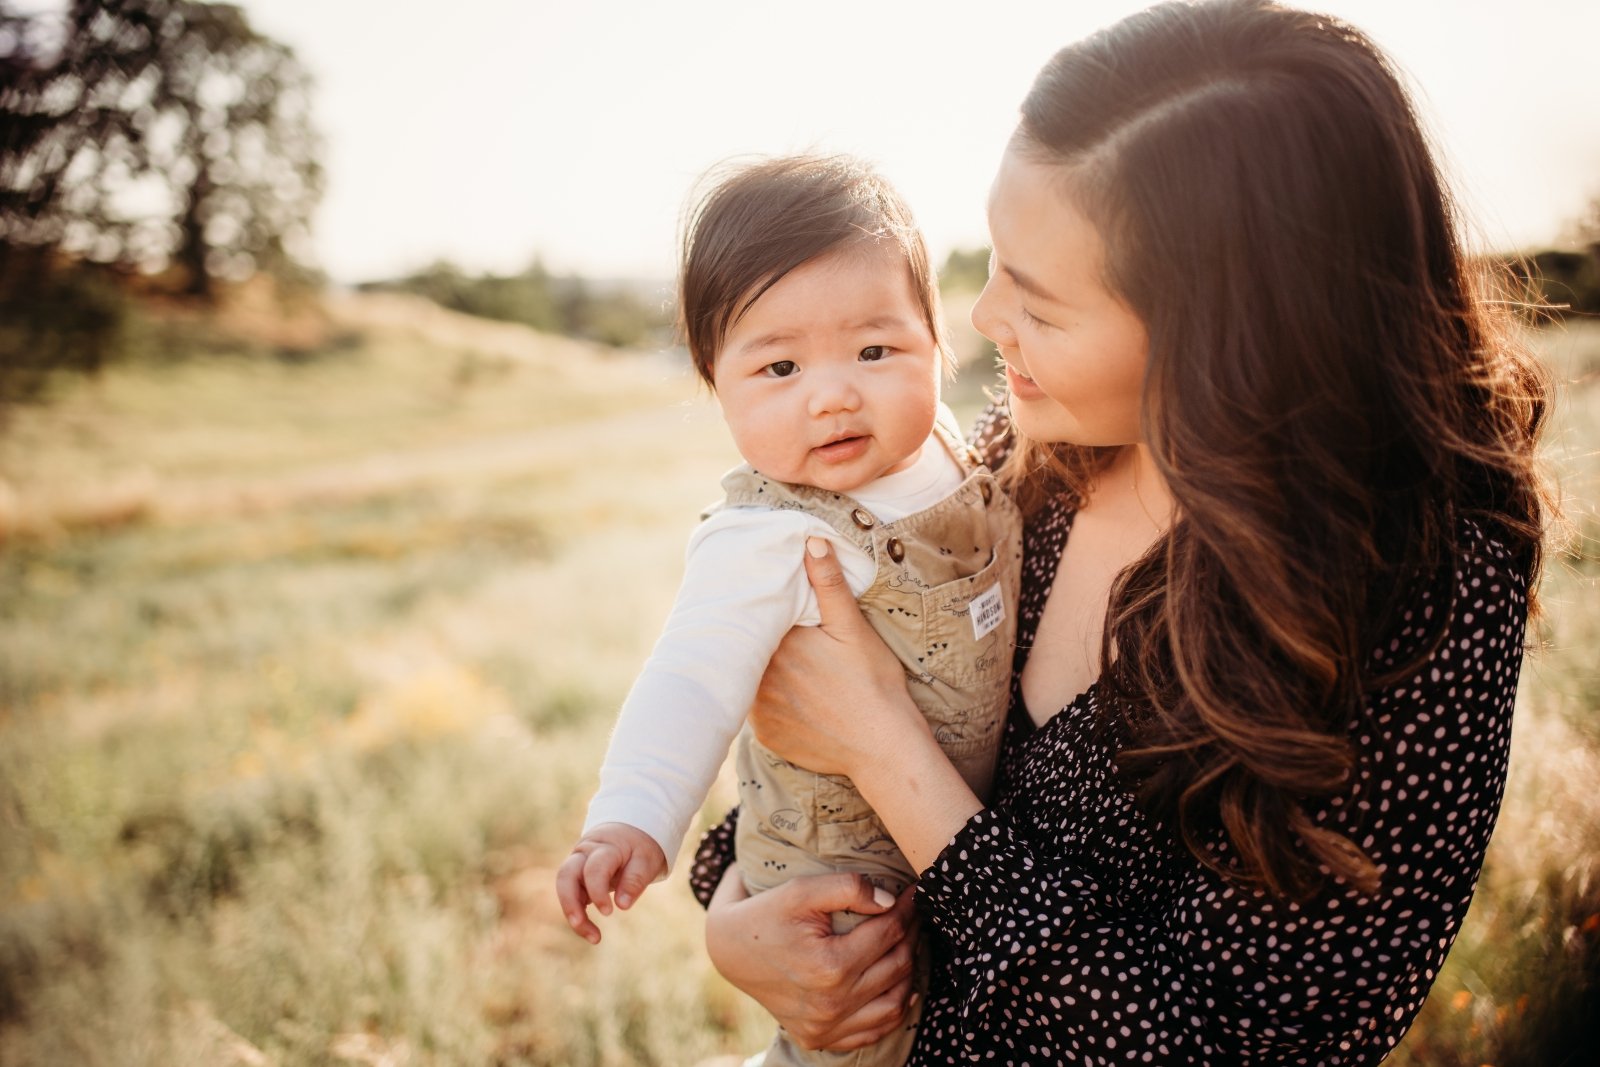 EAST BAY AREA FAMILY PHOTOGRAPHY SHELL RIDGE OPEN SPACE BABY LIFESTYLE PHOTOSHOOT  10.jpg